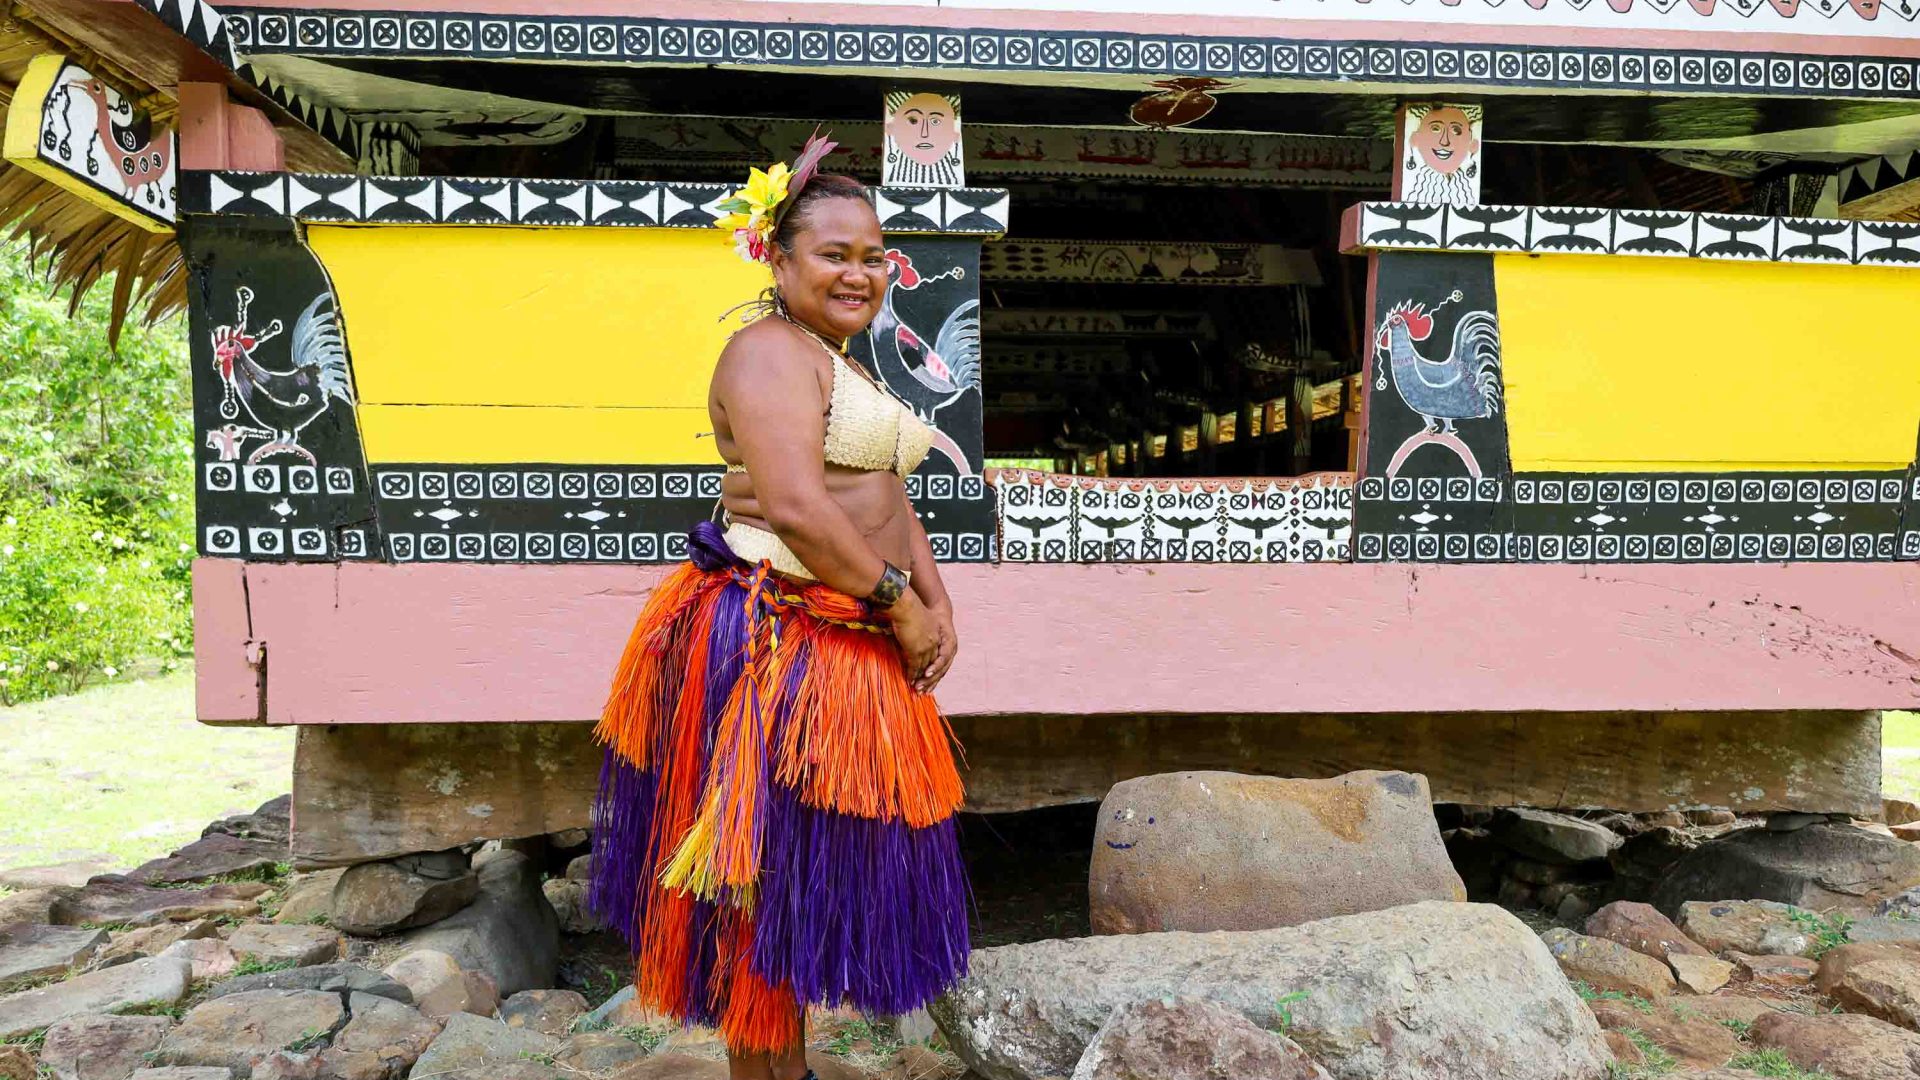 Ladies first? Life in Palau, one of the world’s last matriarchies